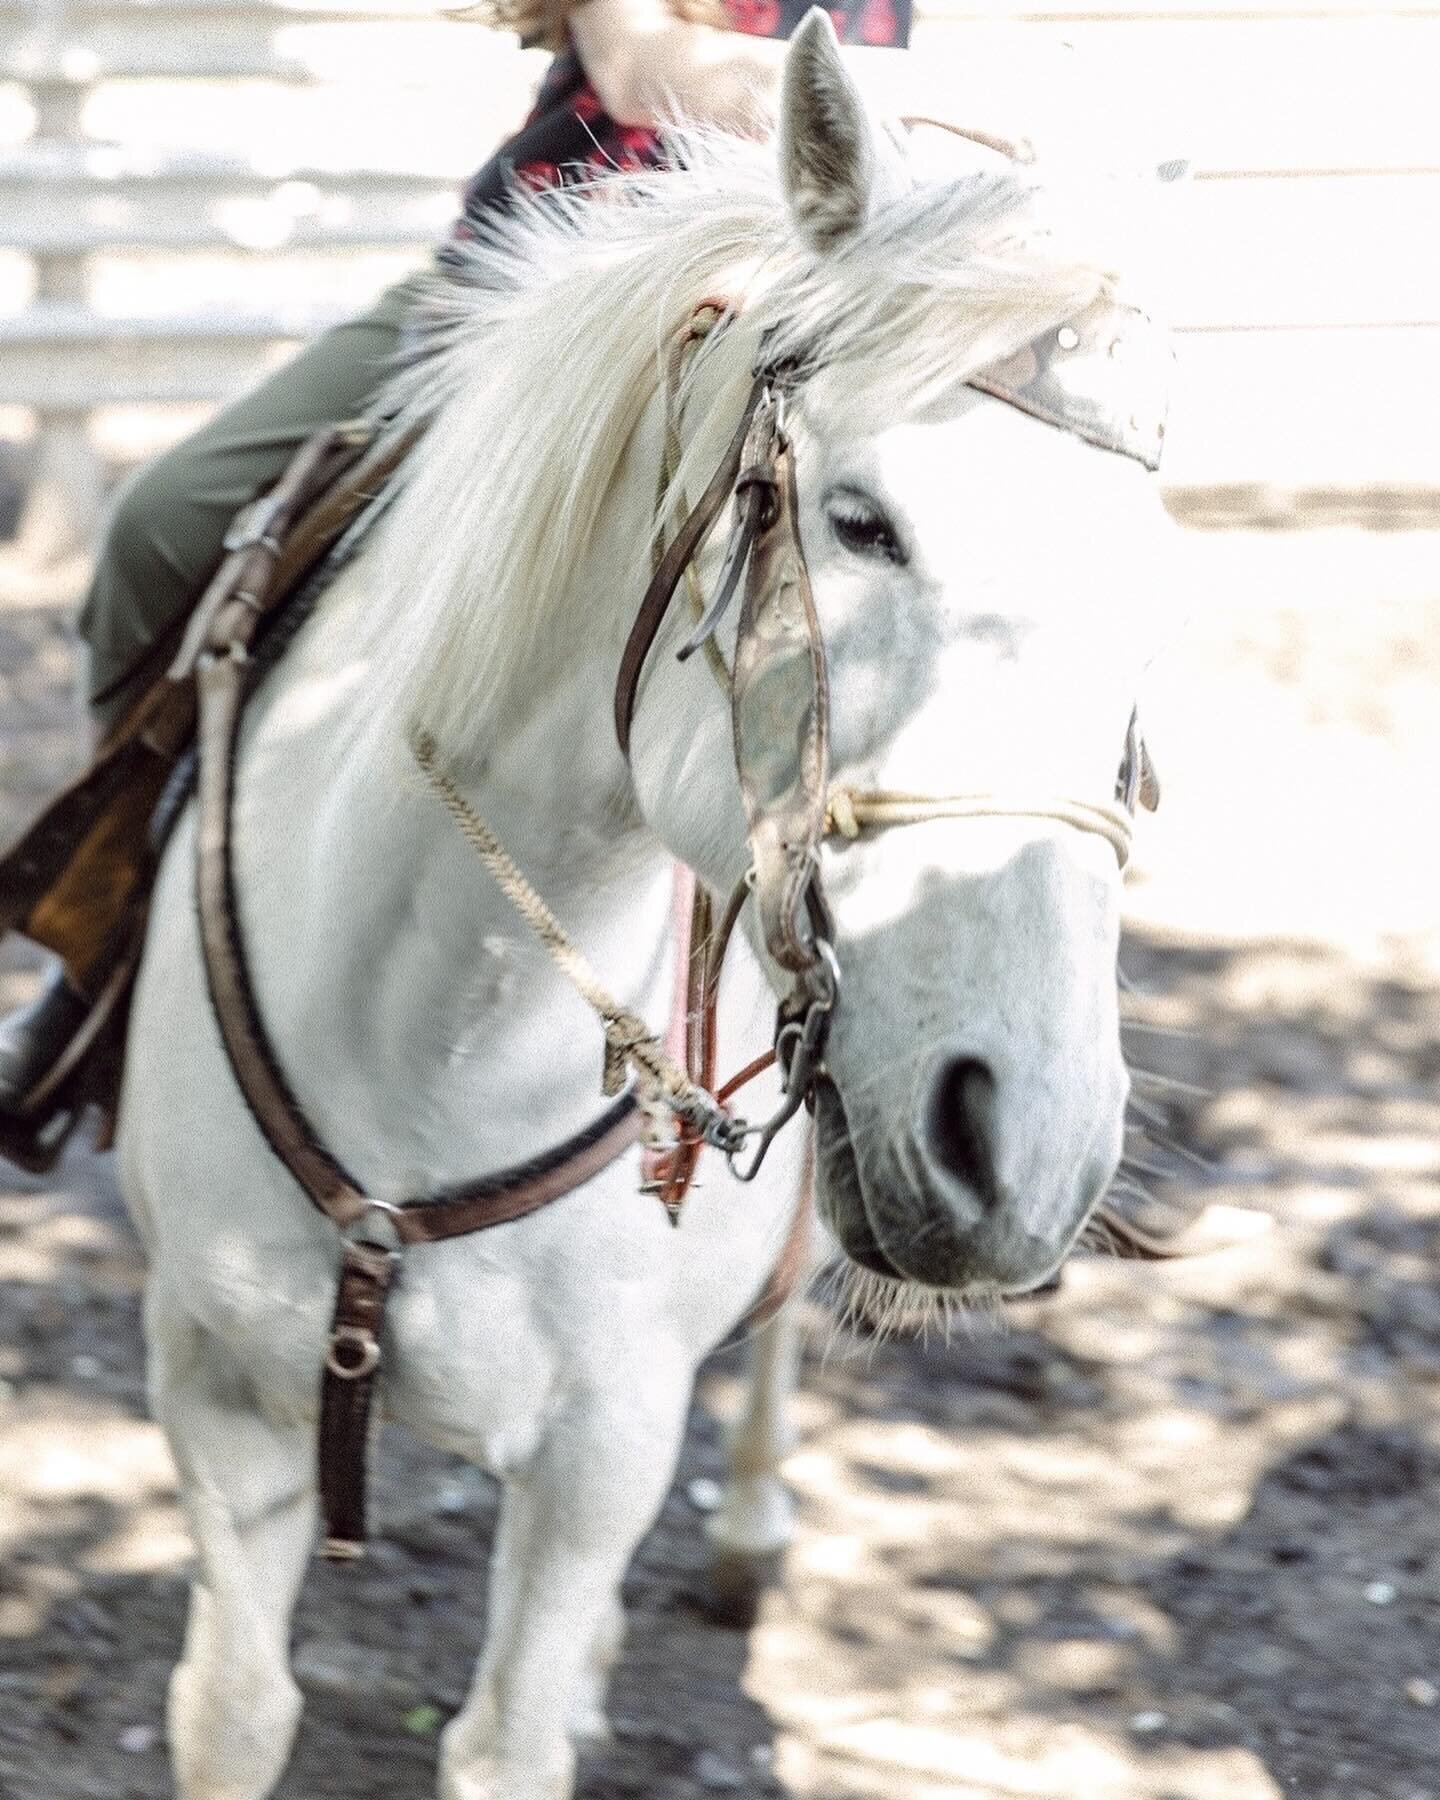 They say scent can transport you back to a place. If there is just one that takes me back home it's the comforting and distinct smell of horses. Horses have been a part of my life ever since I can remember. Spending the morning at Triple L Ranch, whi